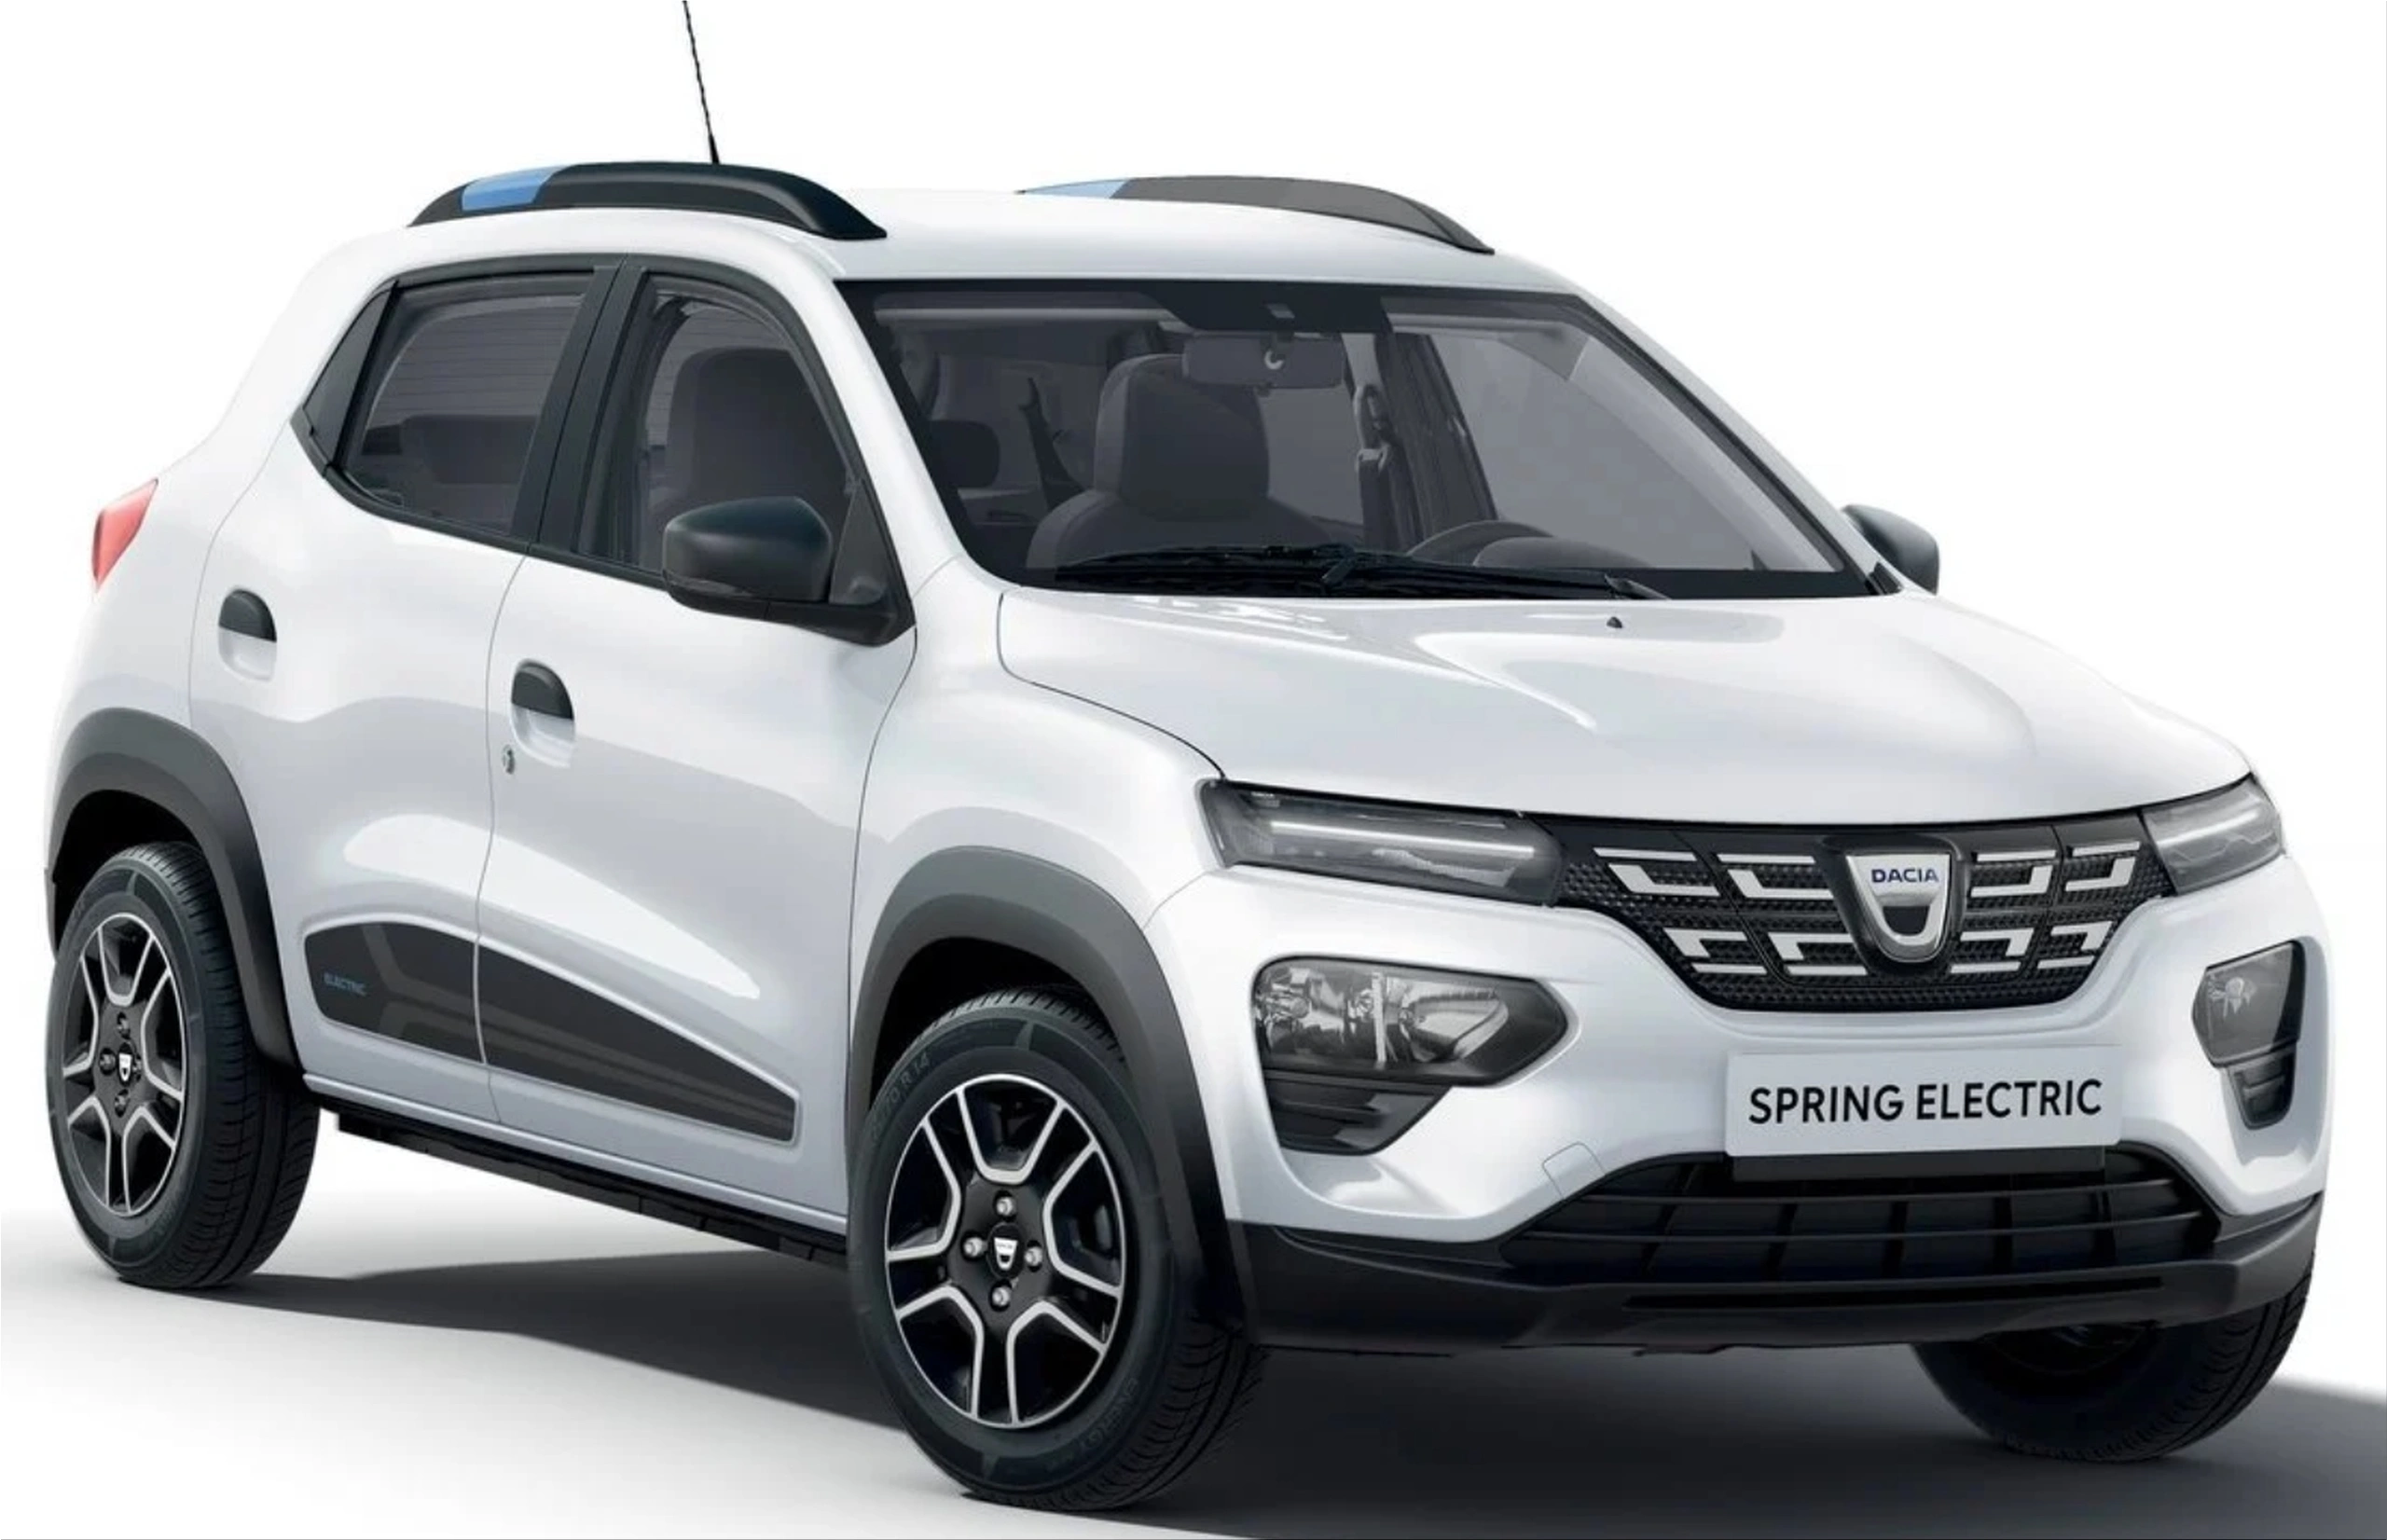 Dacia Spring Electric Concept Proves Cool EVs Can Come In Small